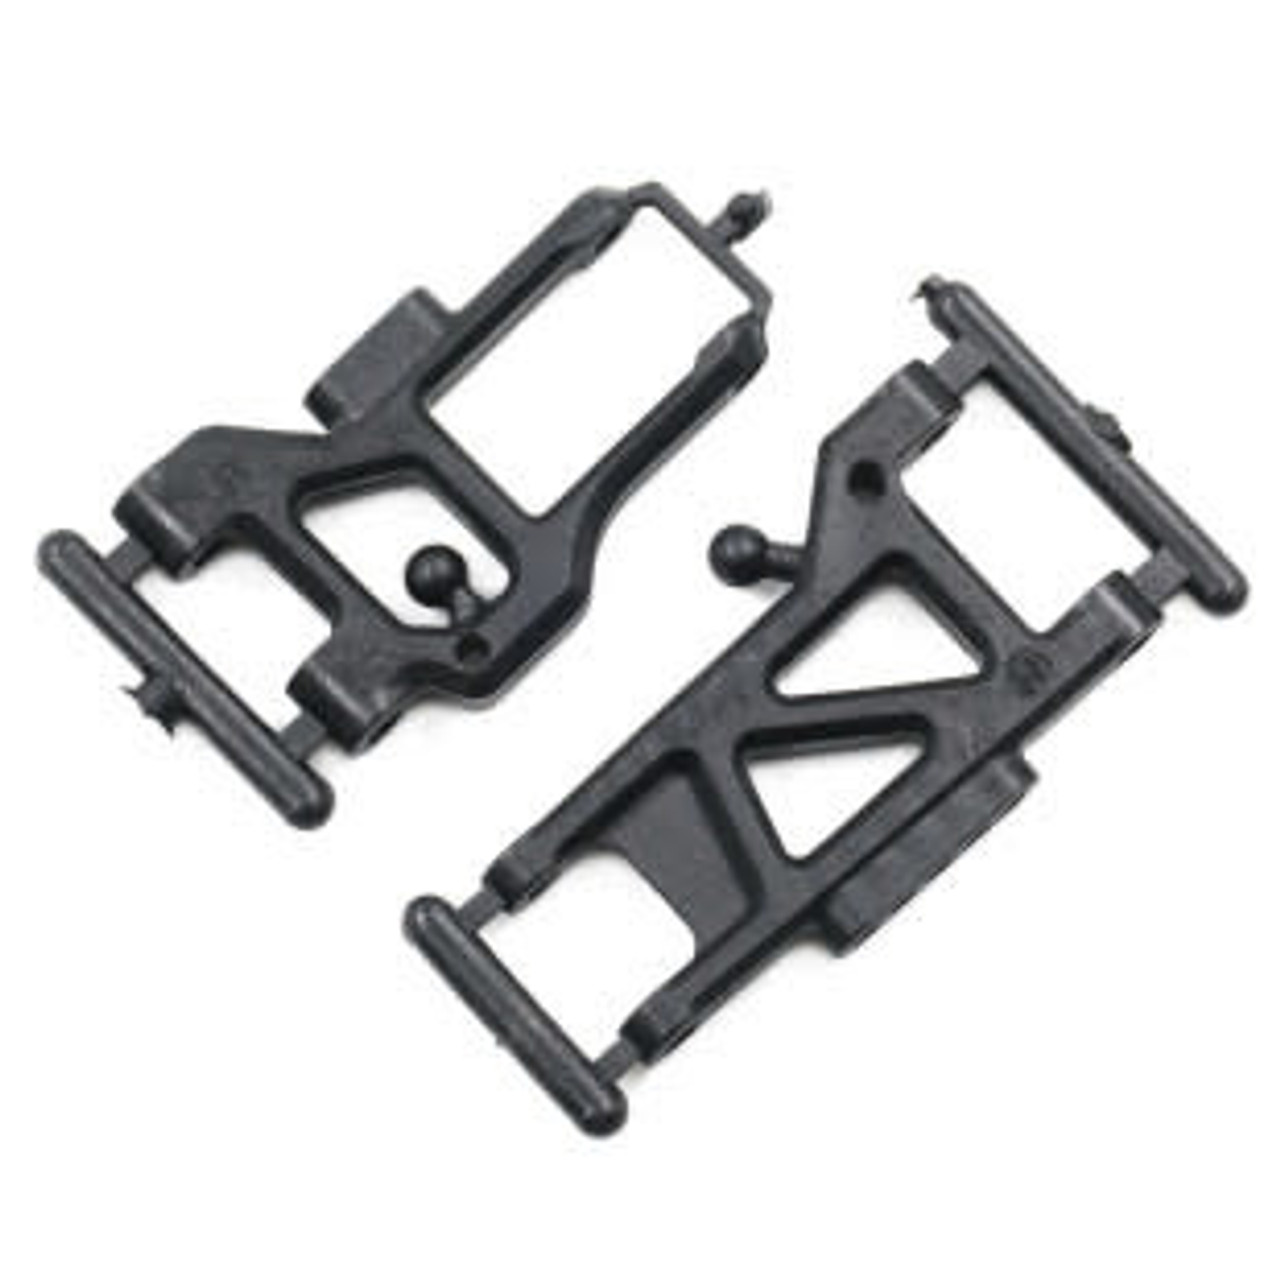 XPRESS Hard Composite Front and Rear Arm For XM1 XM1S FM1S